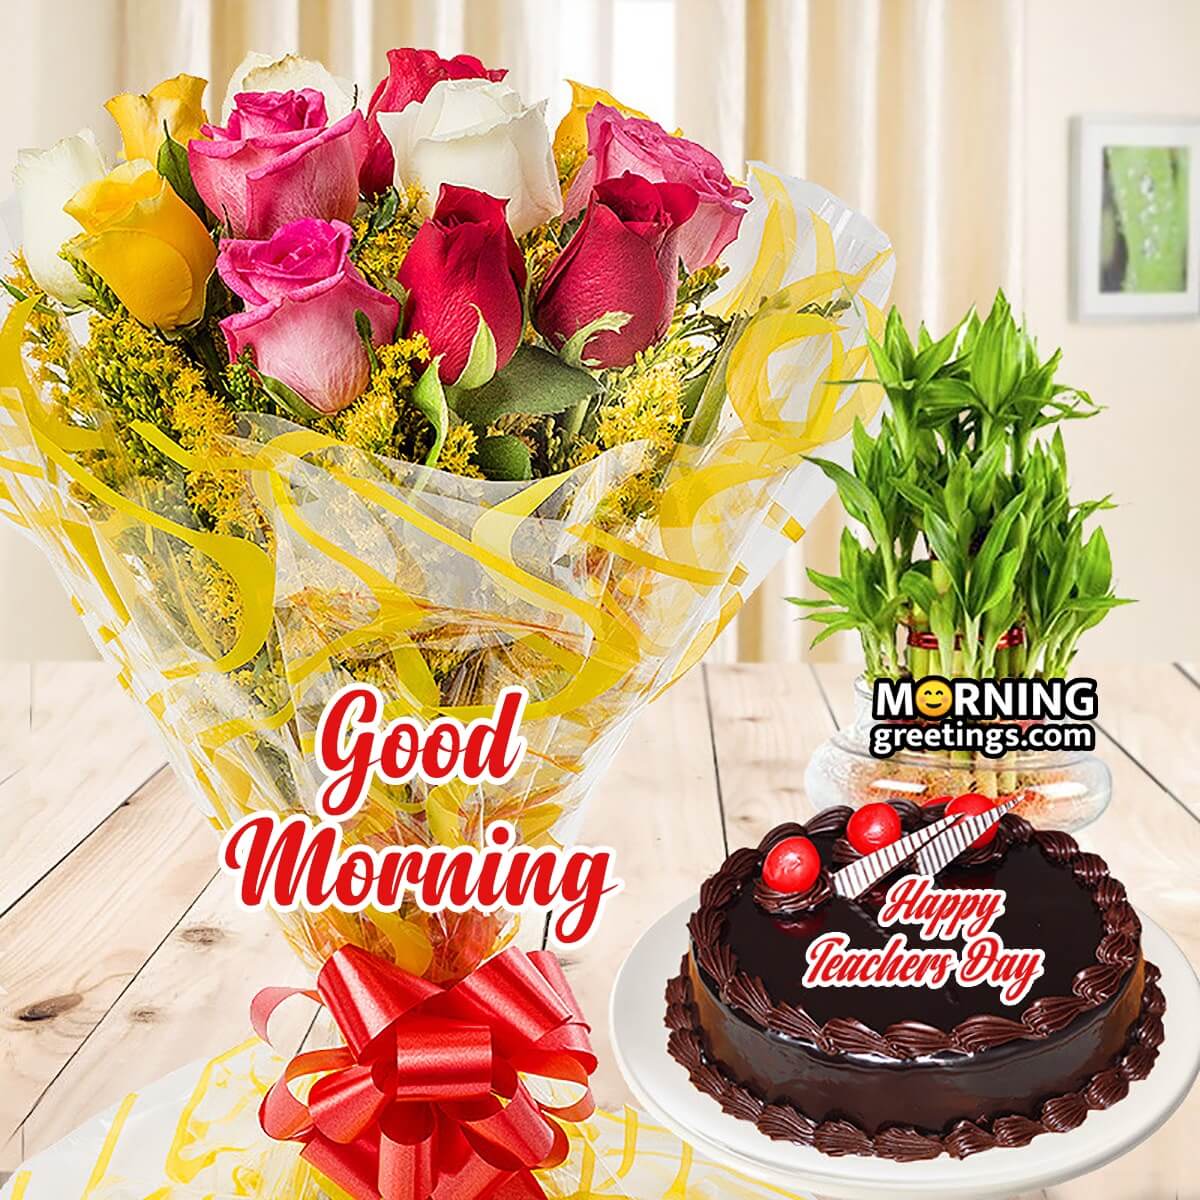 Good Morning Happy Teacher's Day Bouquet And Cake Image